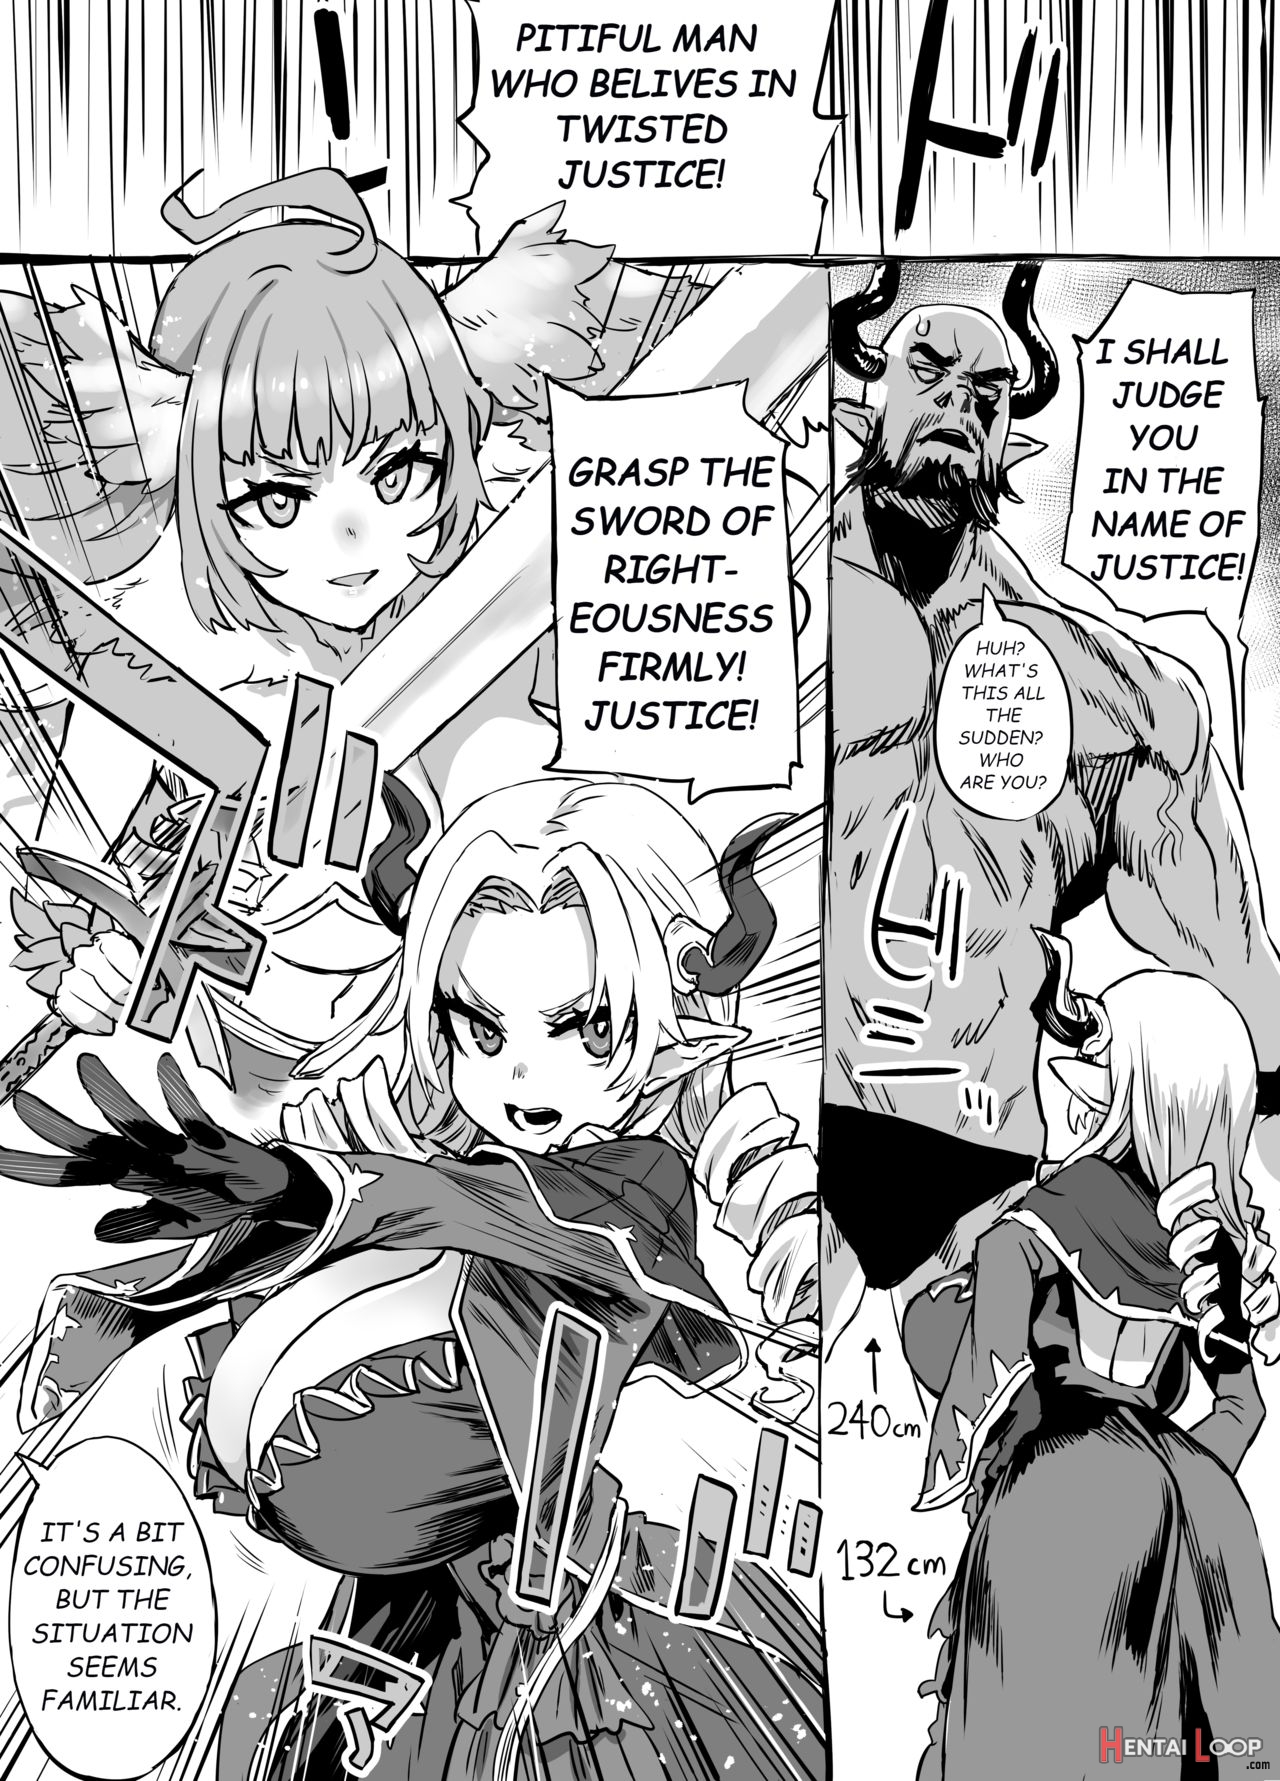 【sword Of Righteousness】 Empress Maria Theresa page 1